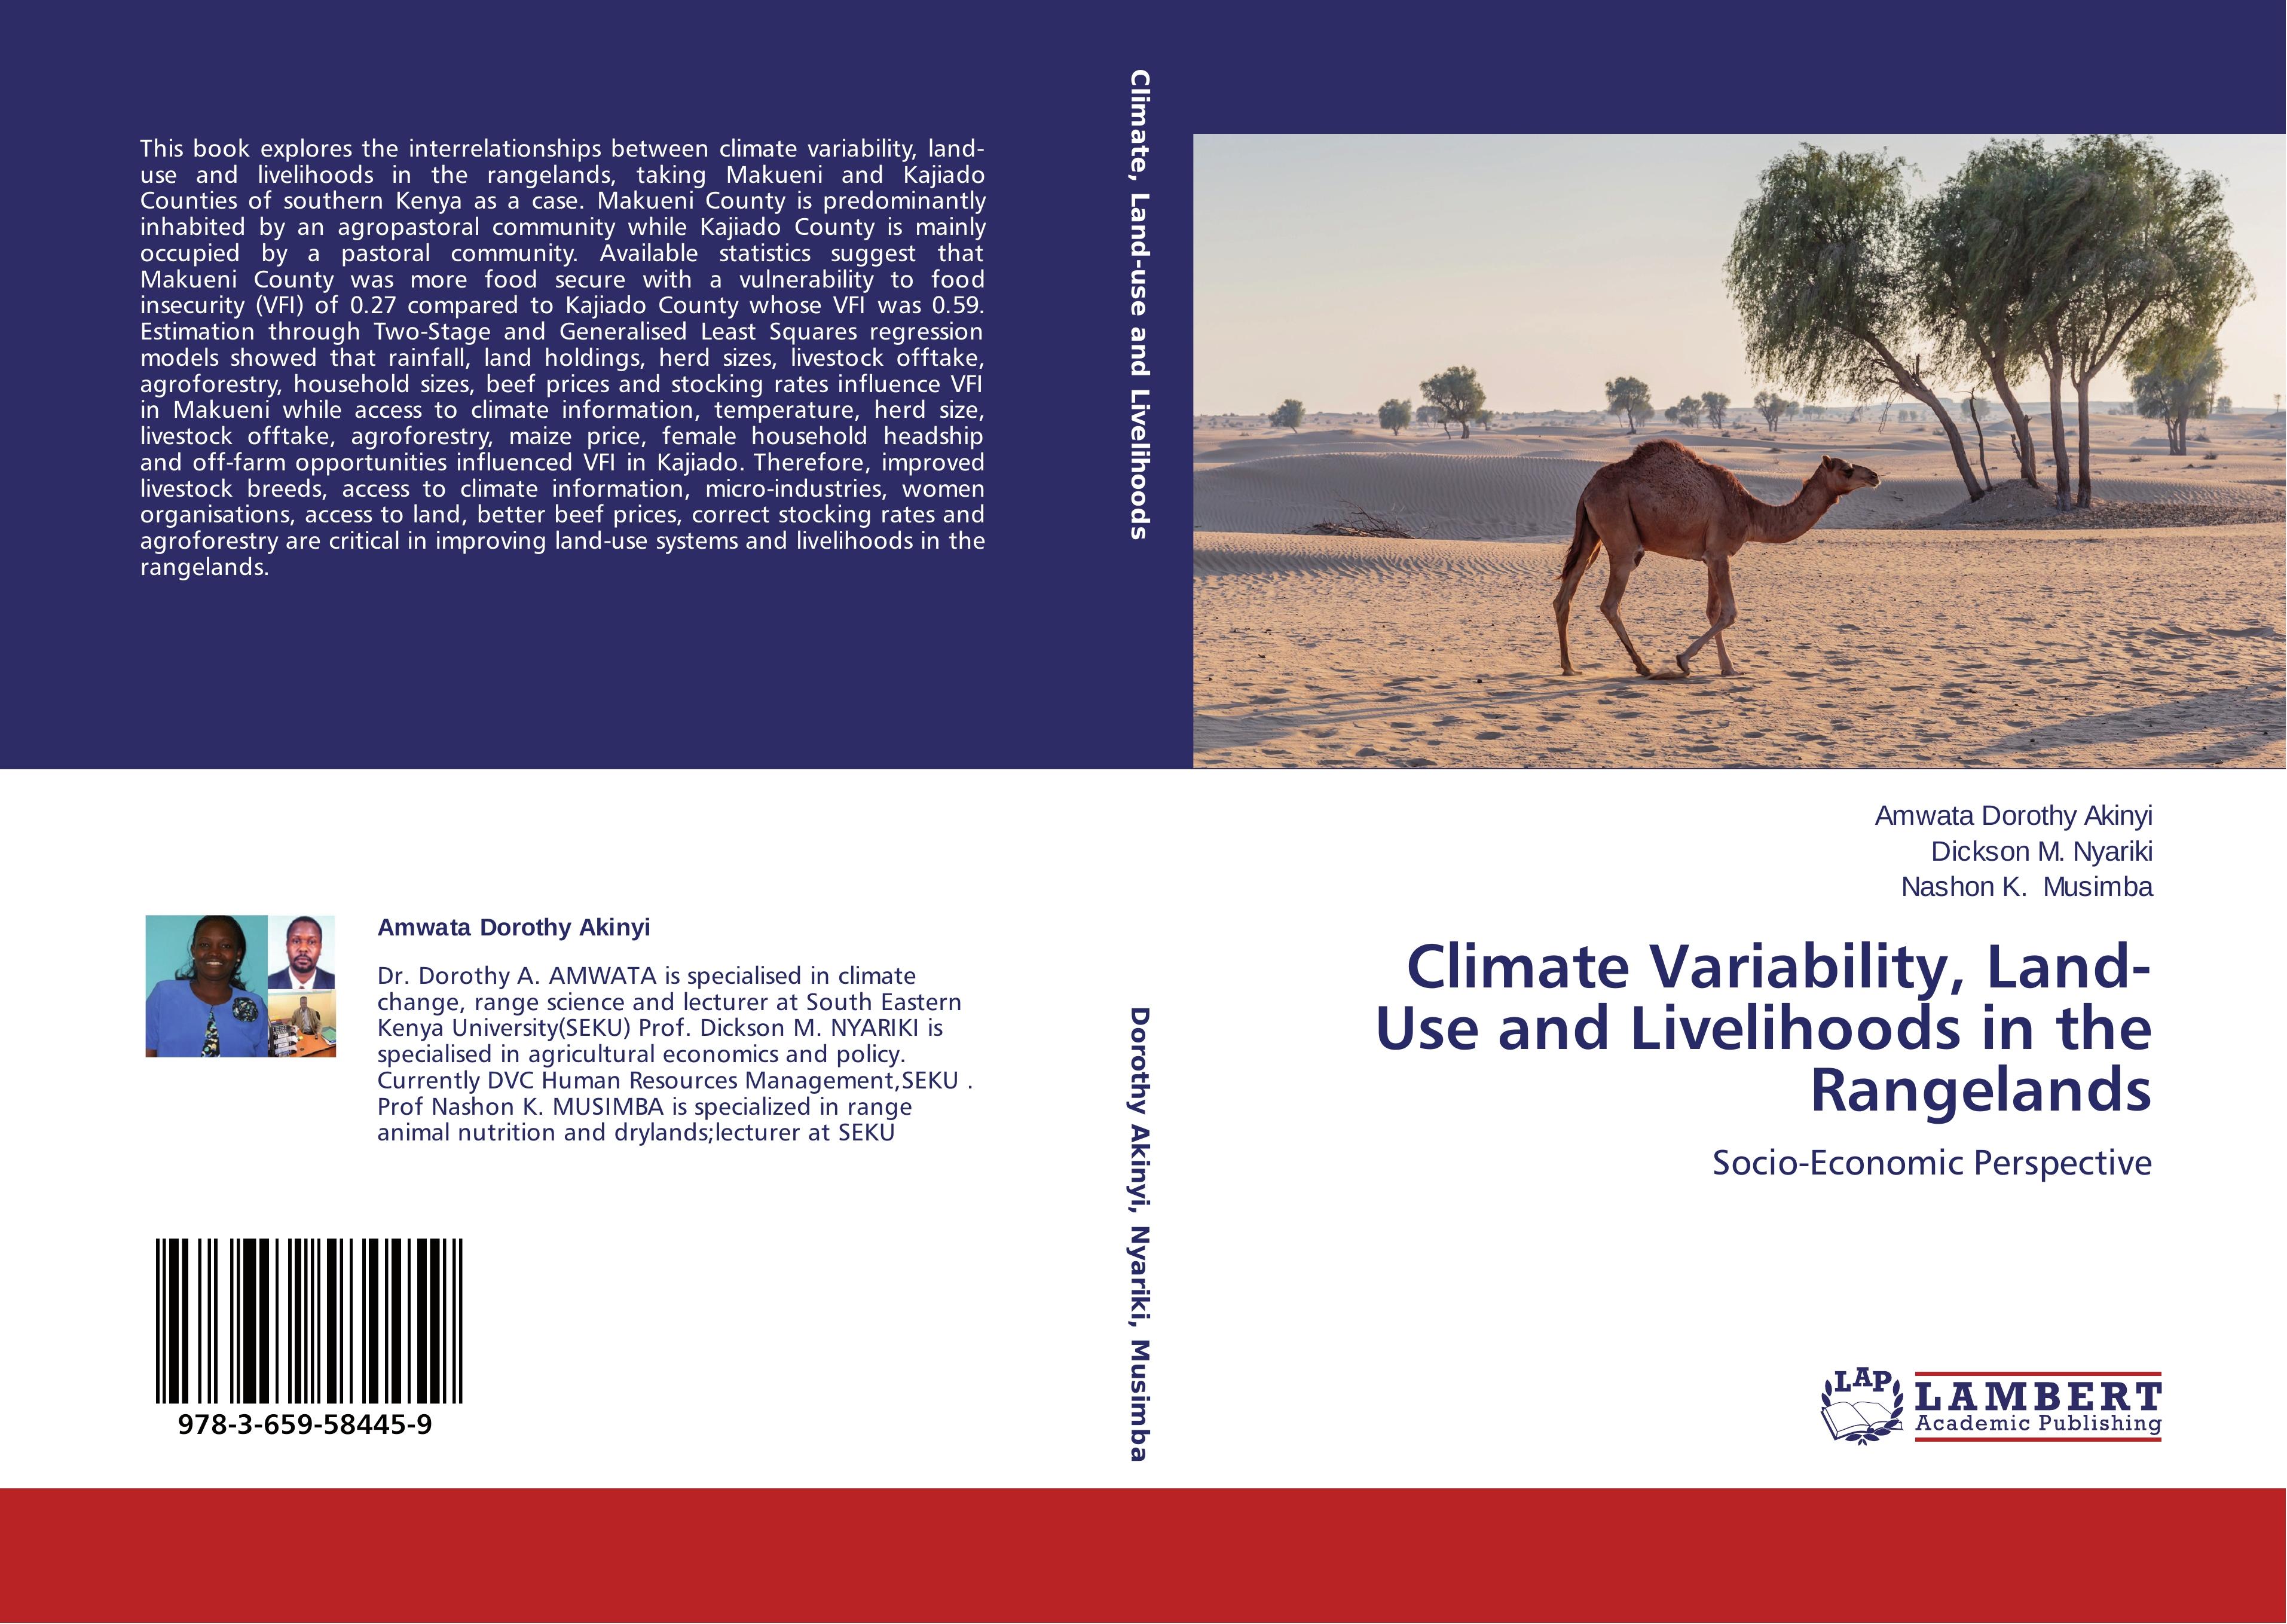 Climate Variability, Land-Use and Livelihoods in the Rangelands